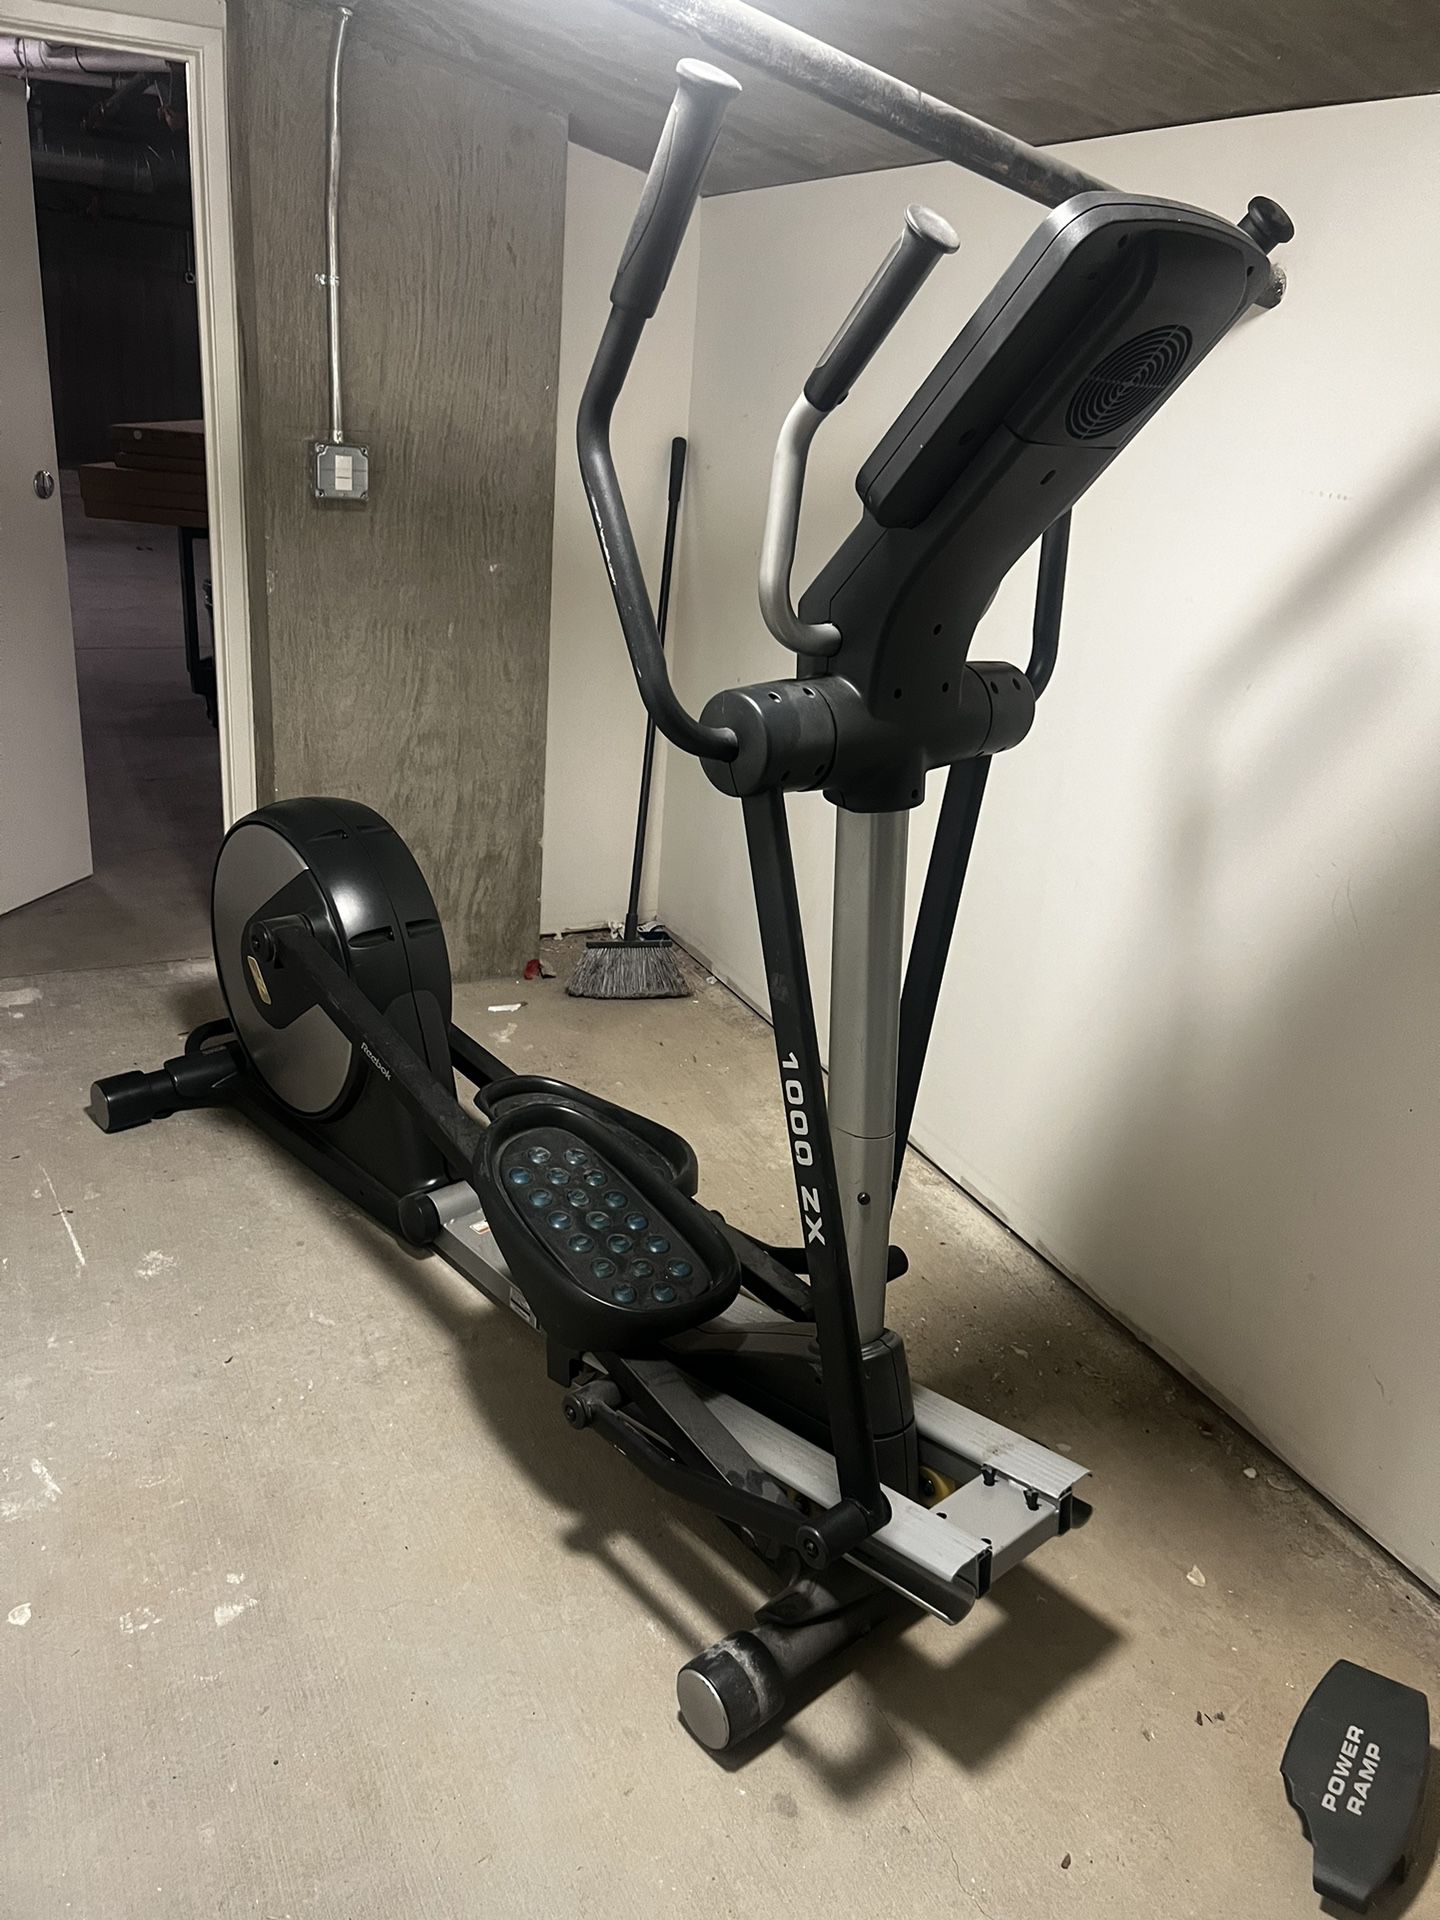 The Reebok 1000 ZX Elliptical with Motorized Incline Ramp for in Chula Vista, CA - OfferUp